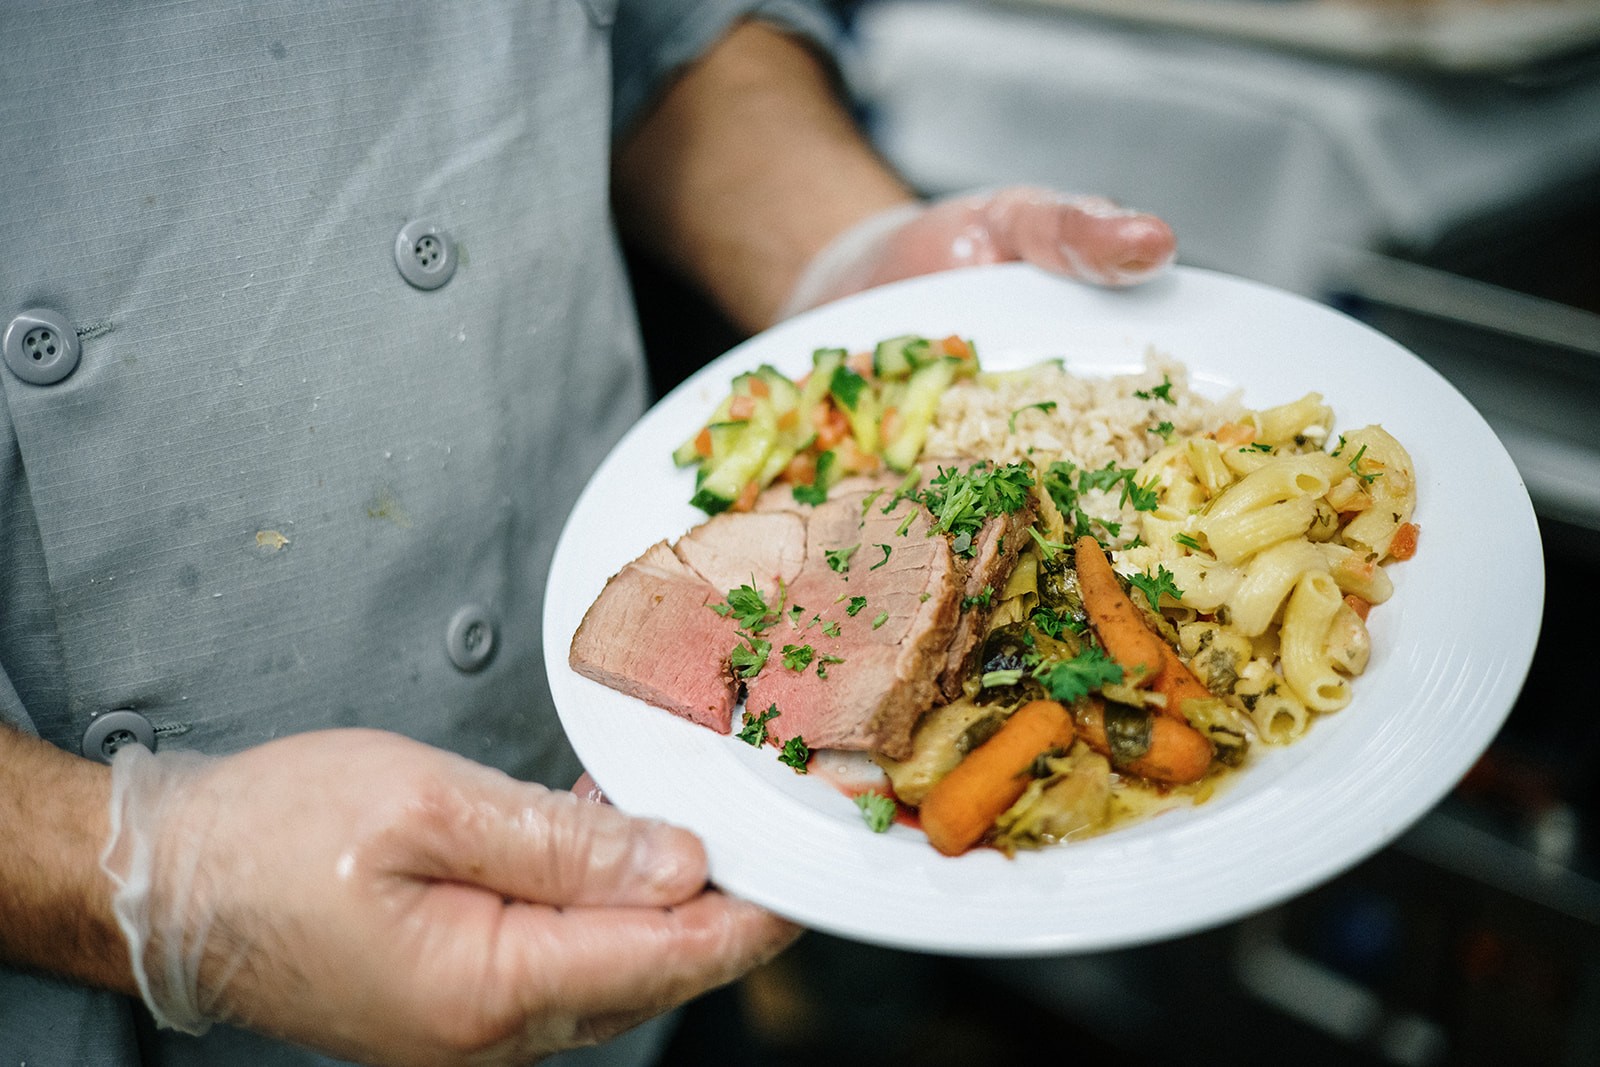 Roasted Lamb with vegetables and pasta salad; photo by April Renae